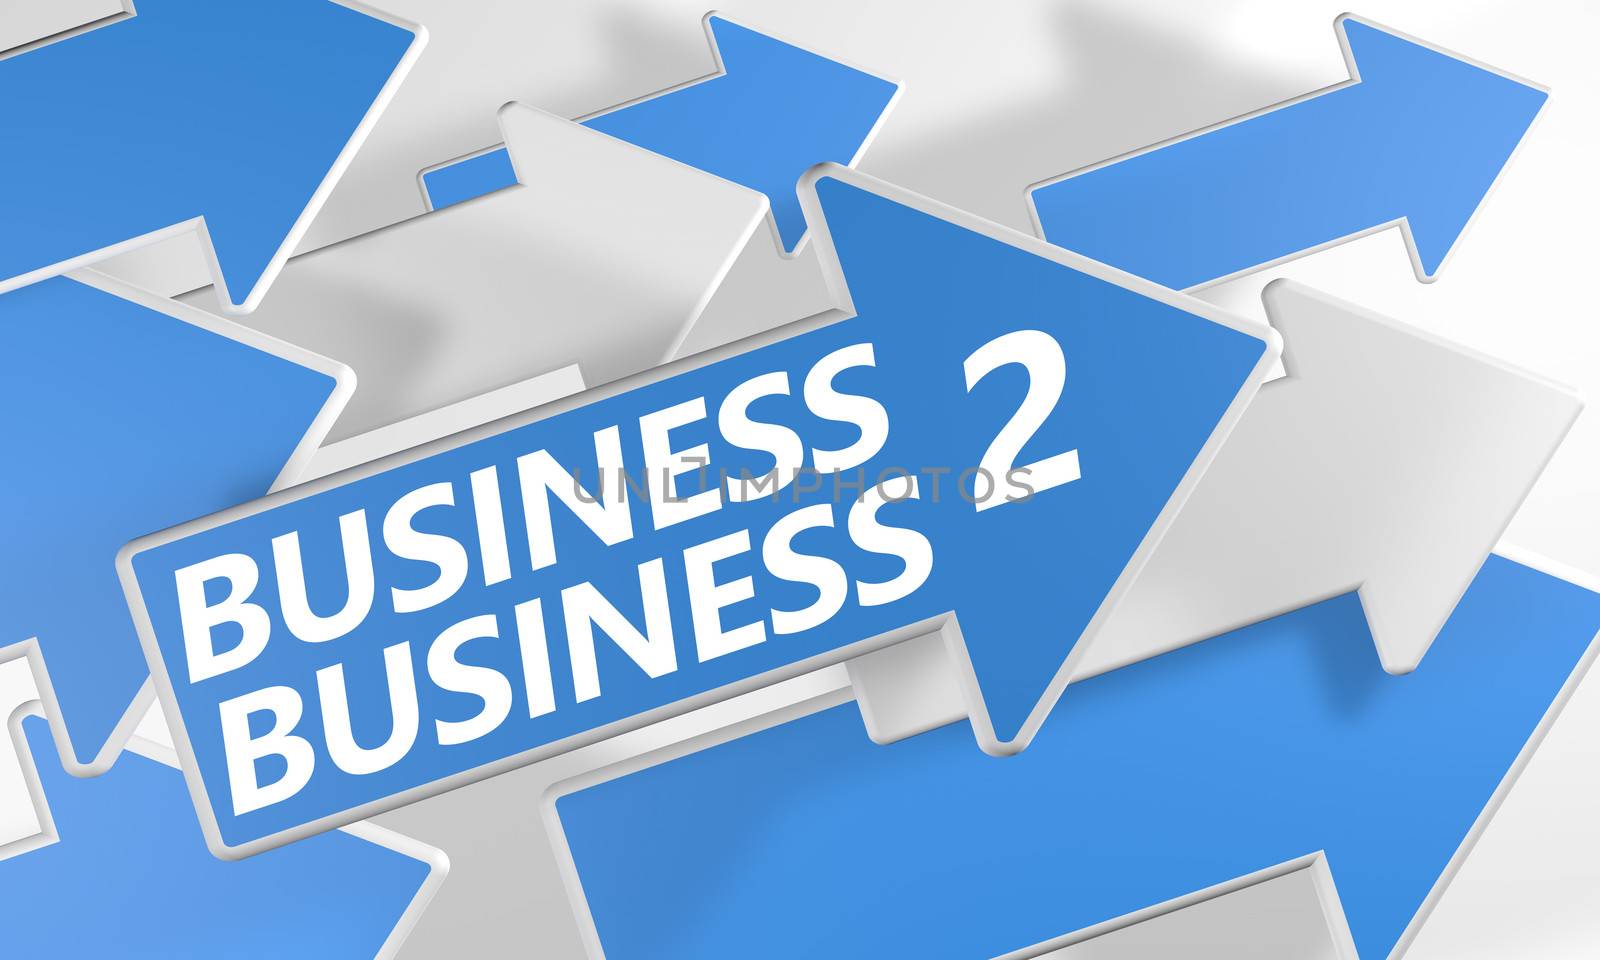 Business 2 Business 3d render concept with blue and white arrows flying over a white background.